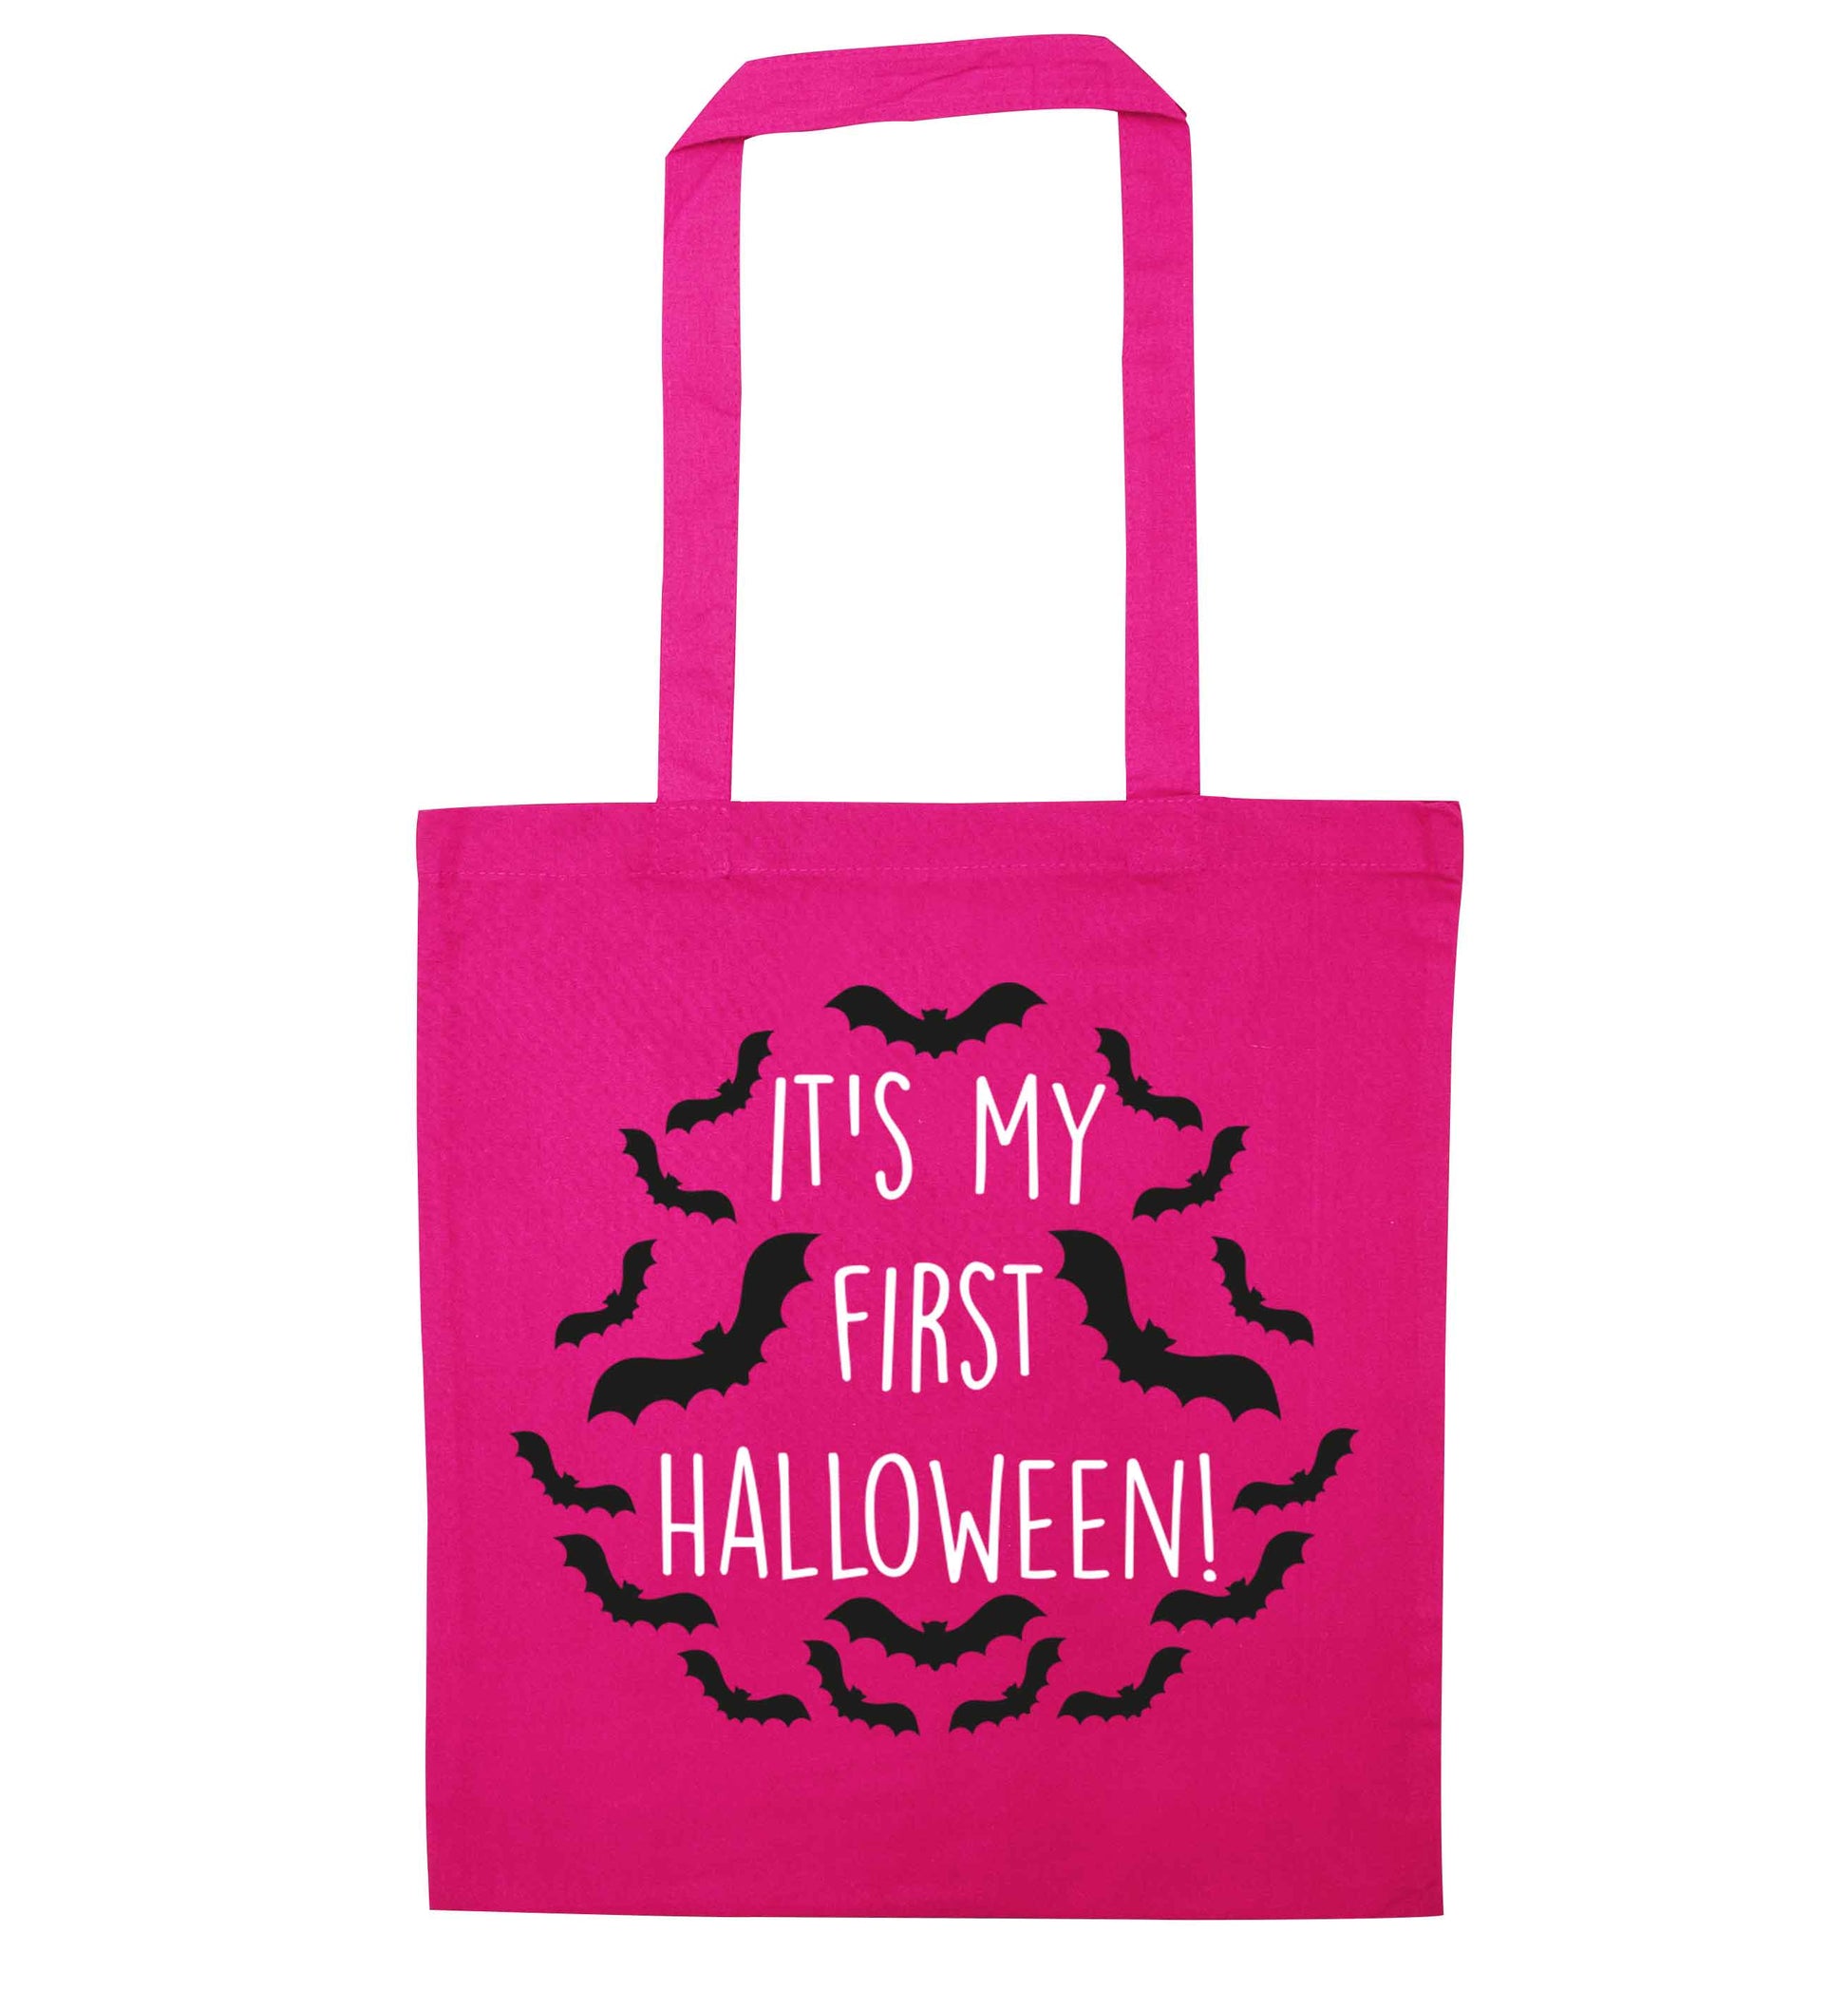 It's my first halloween - bat border pink tote bag